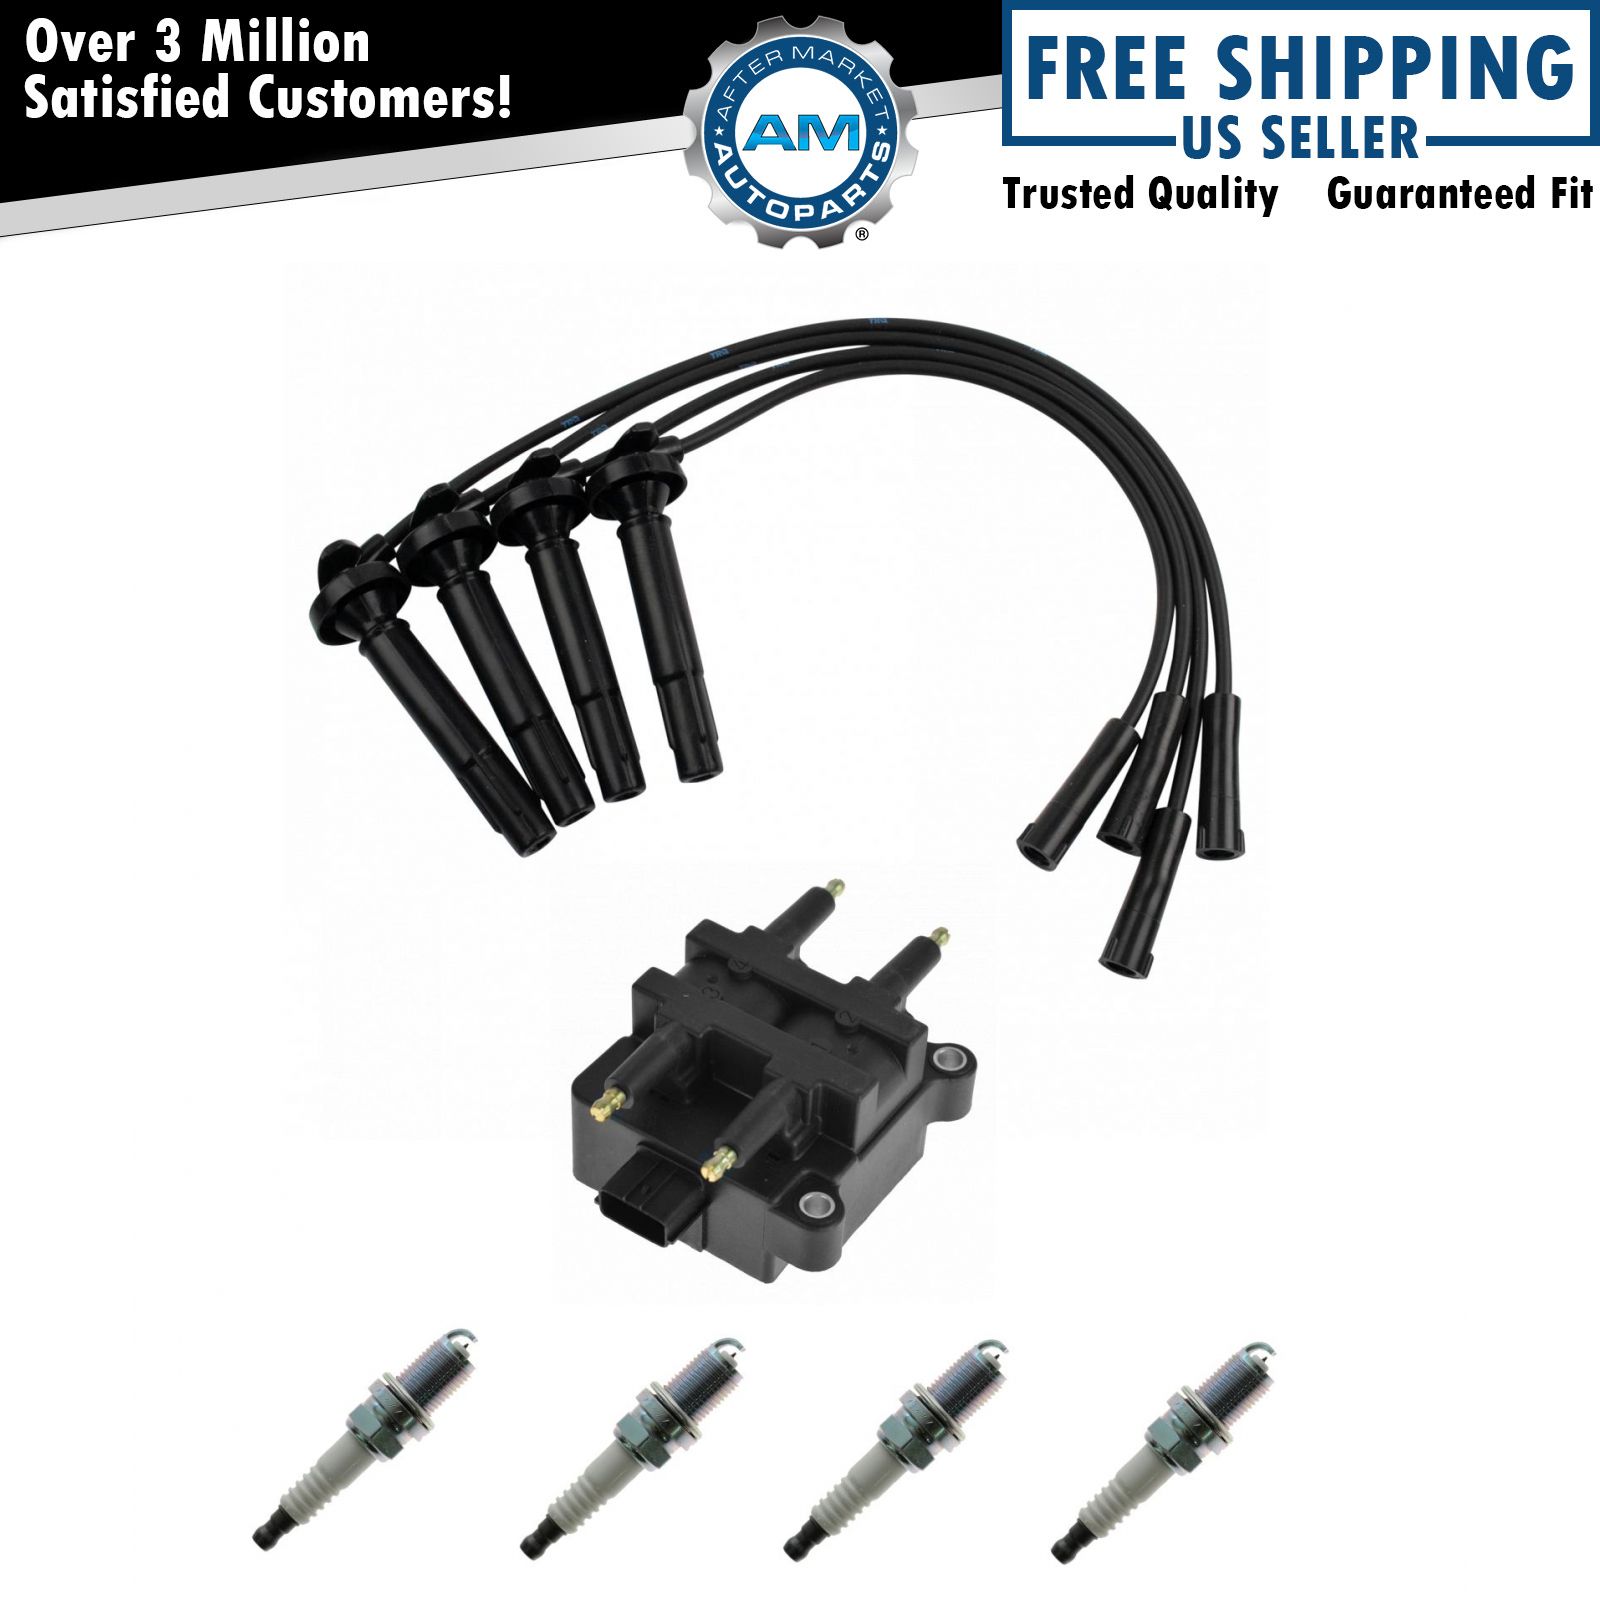 Engine Tune Up Kit Ignition Coils w/ Wires & Spark Plugs for Forester Impreza